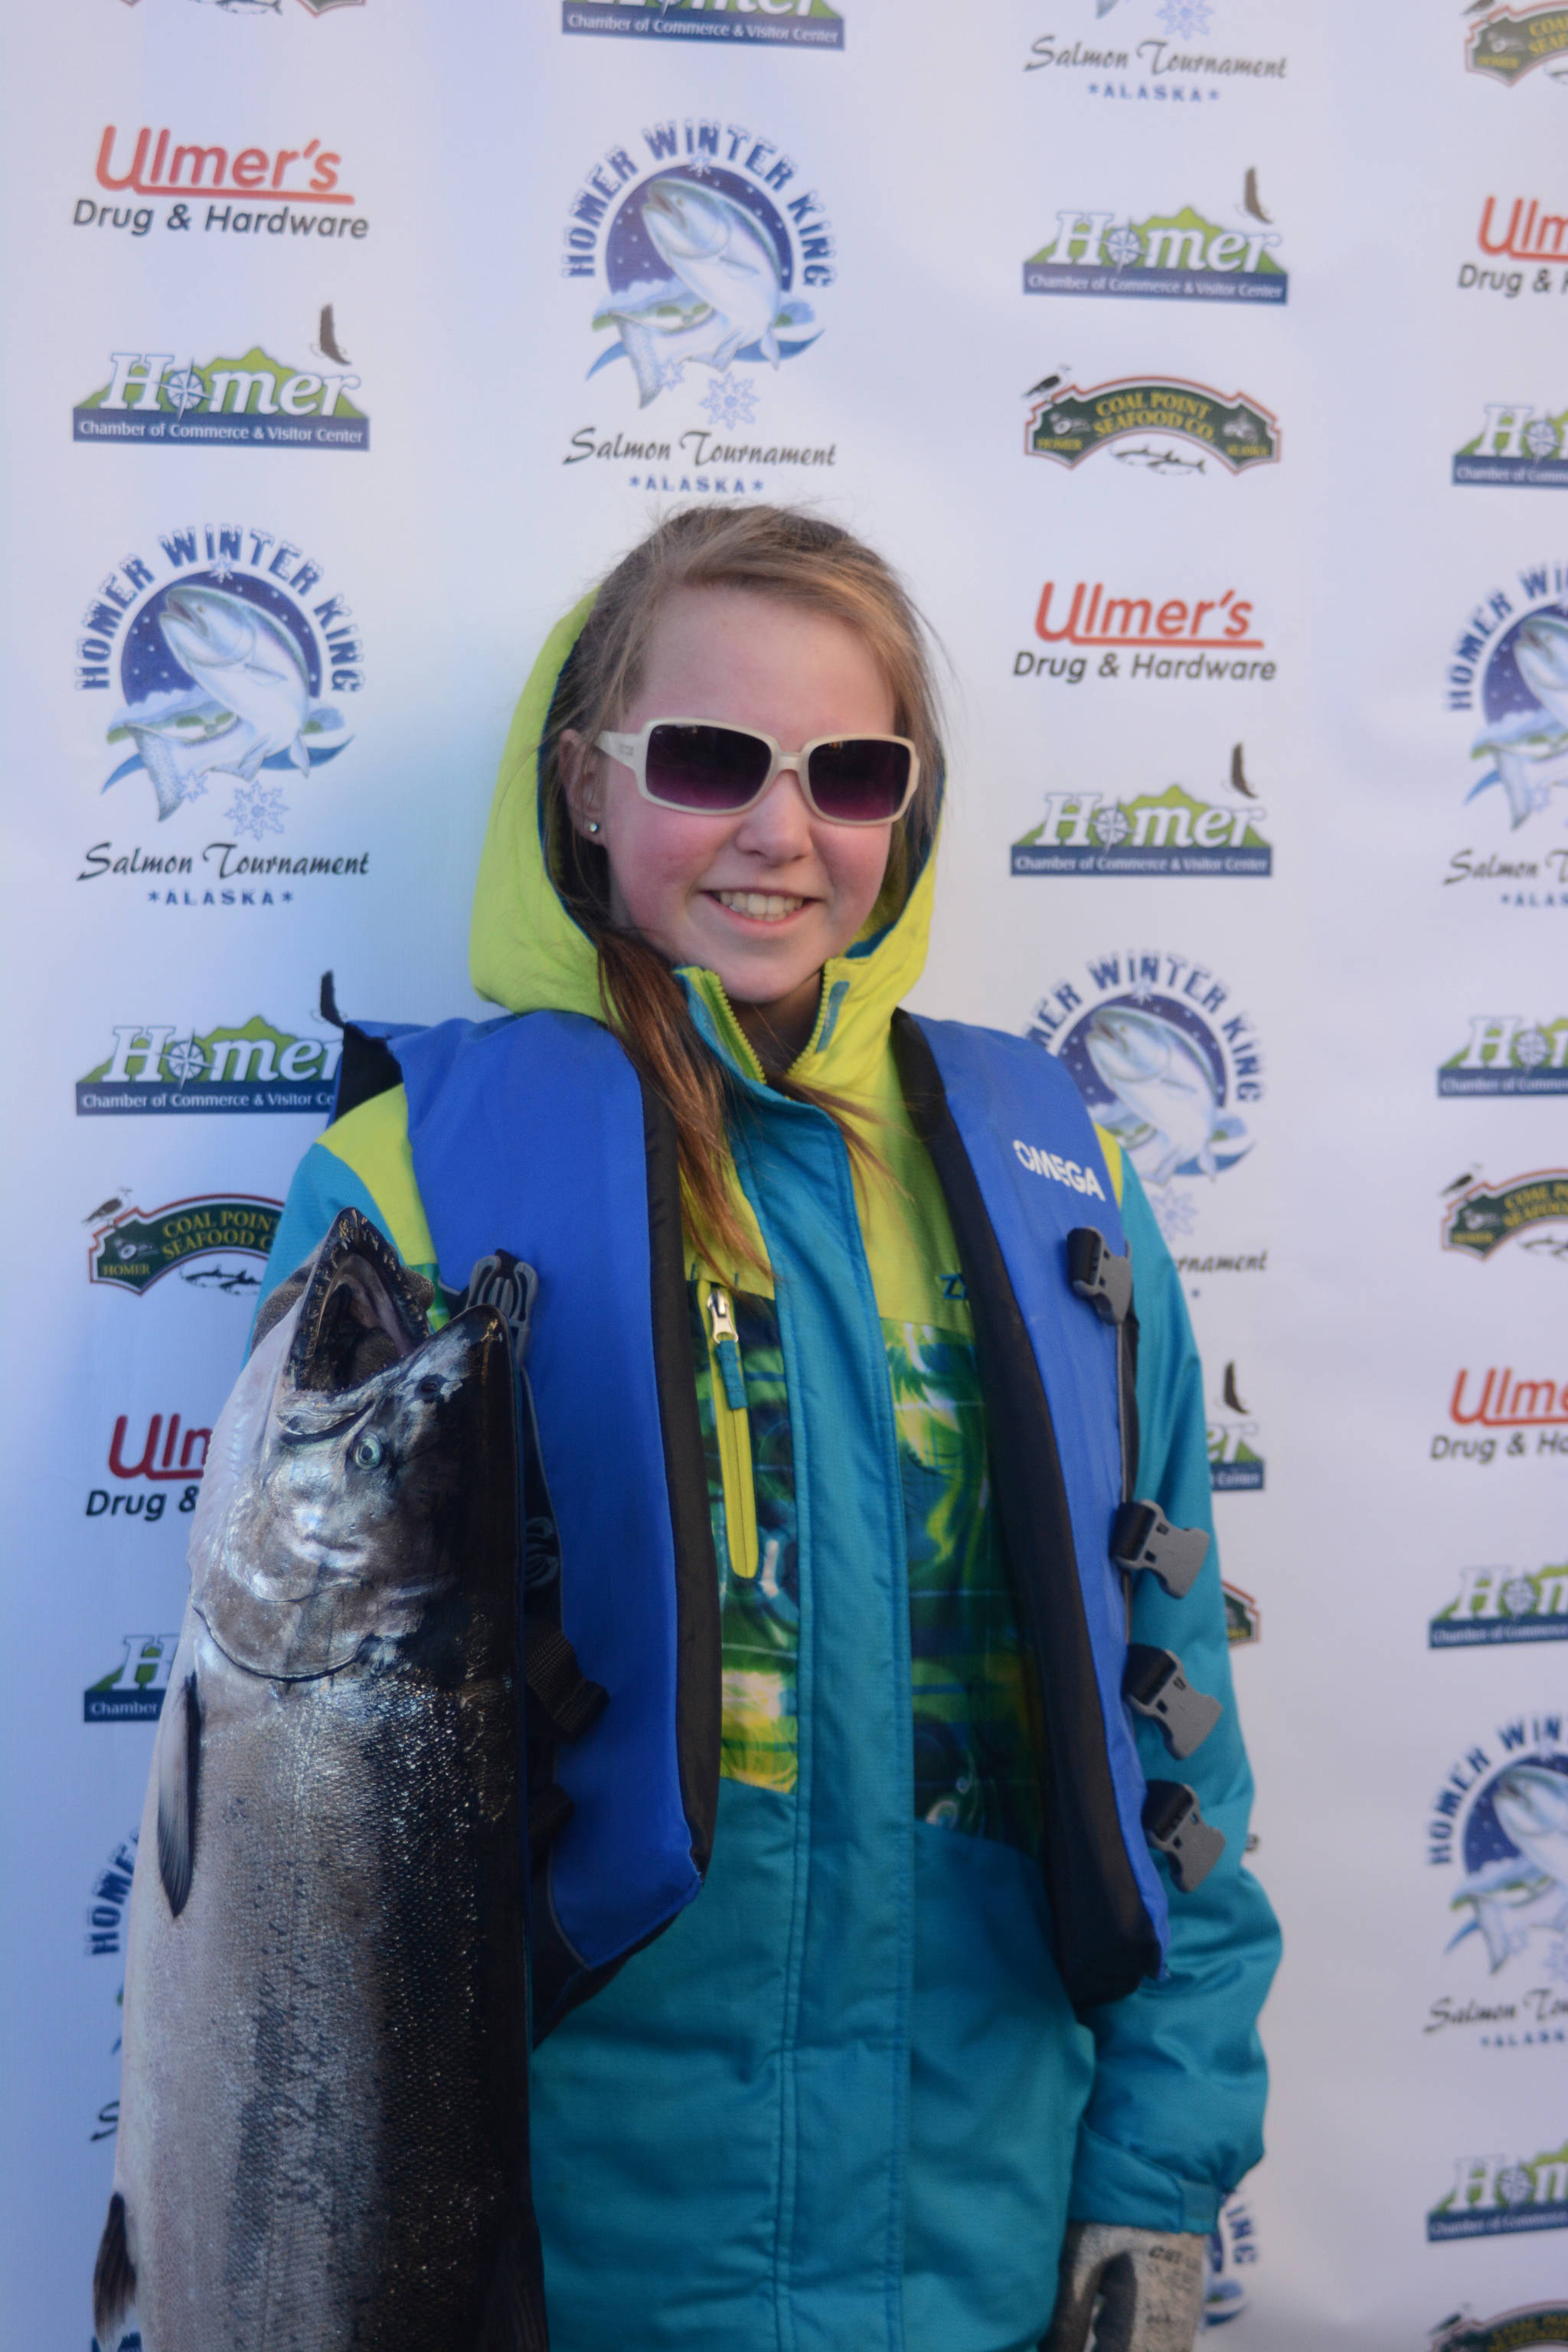 Johnson wins Winter King with 25.65-pound beauty